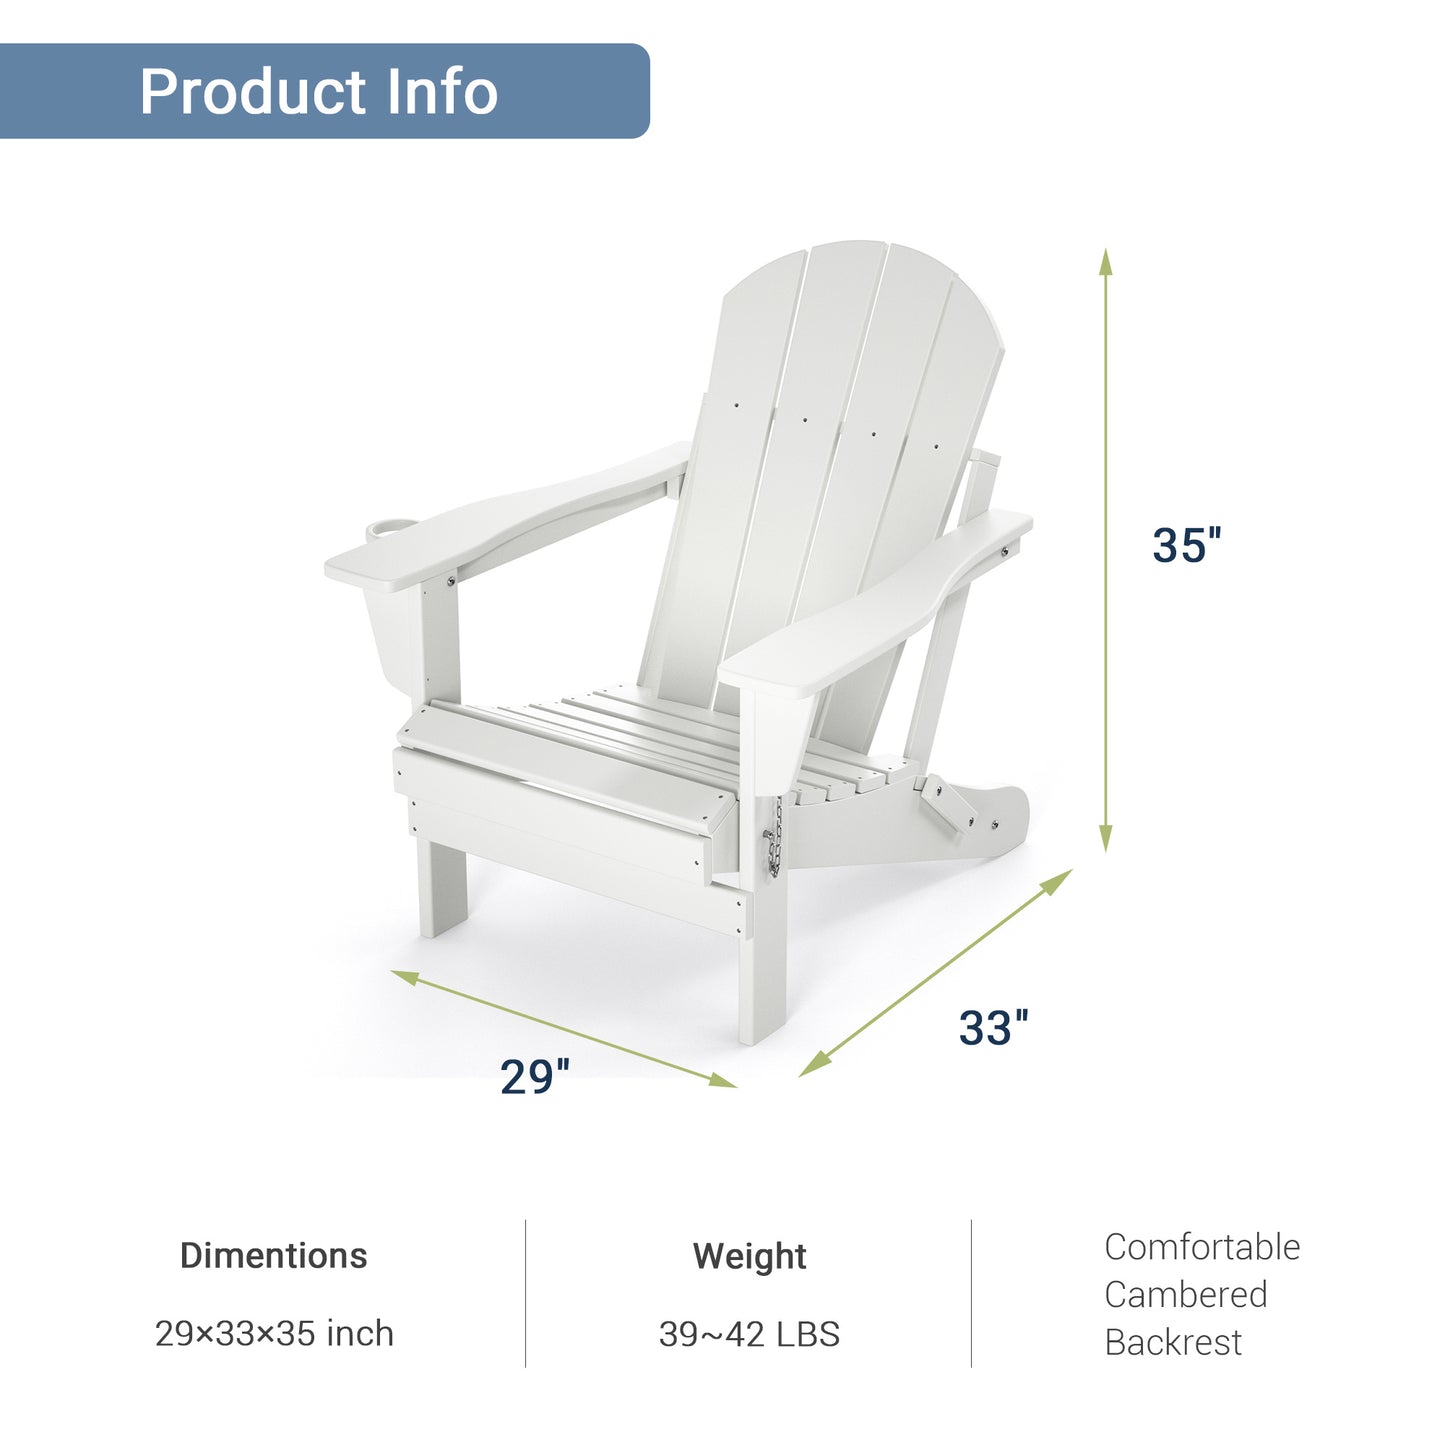 Folding Adirondack Chair with Cup holder, Fire Pit Chair,Patio Outdoor Chairs All-Weather Proof HDPE Resin for BBQ Beach Deck Garden Lawn Backyard (White Color)